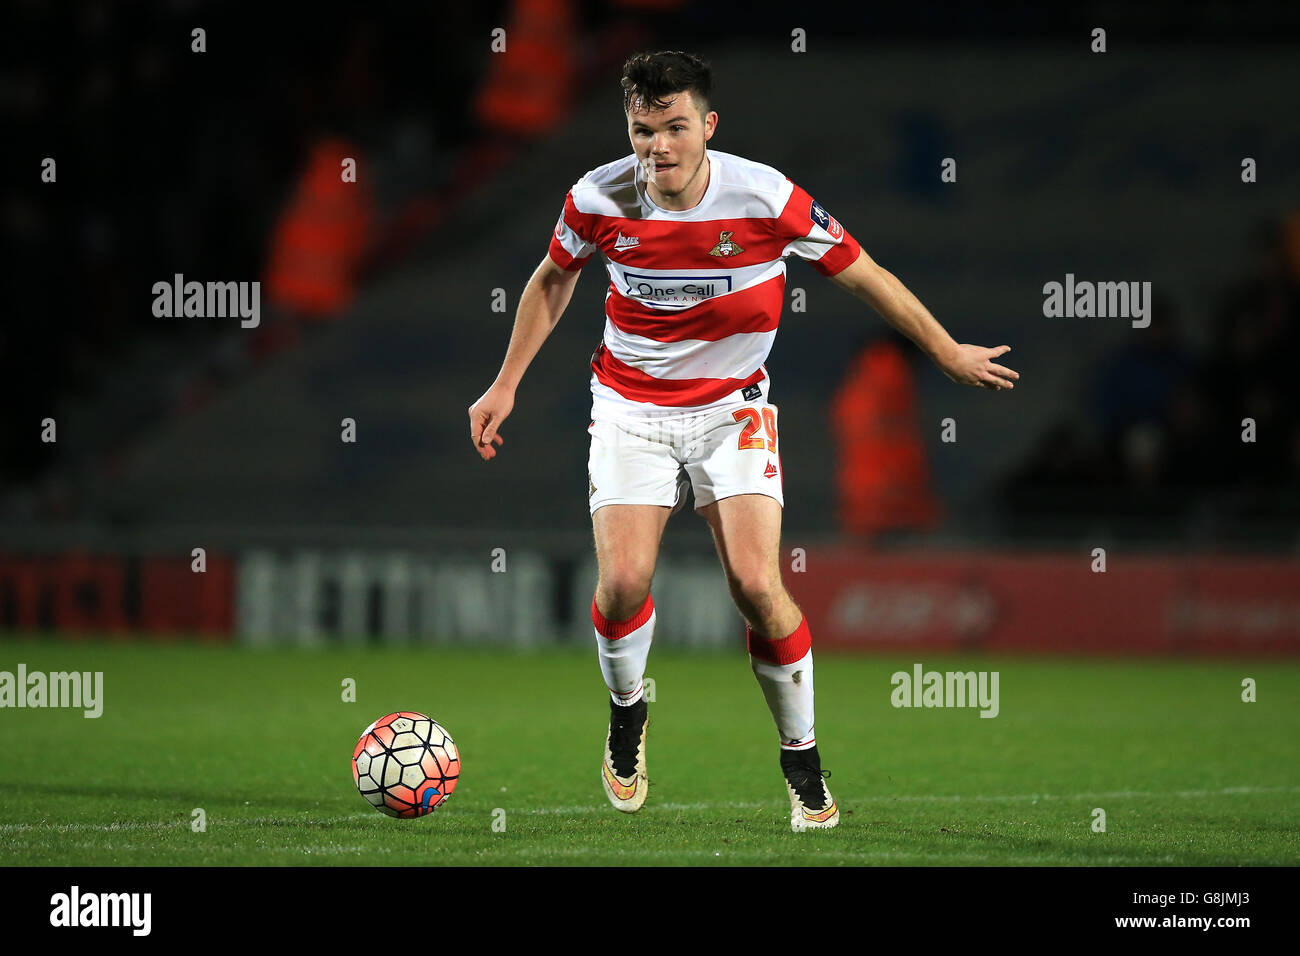 Doncaster Rovers v Stoke City - Emirates FA Cup - Third Round - Keepmoat Stadium. Harry Middleton, Doncaster Rovers Stock Photo